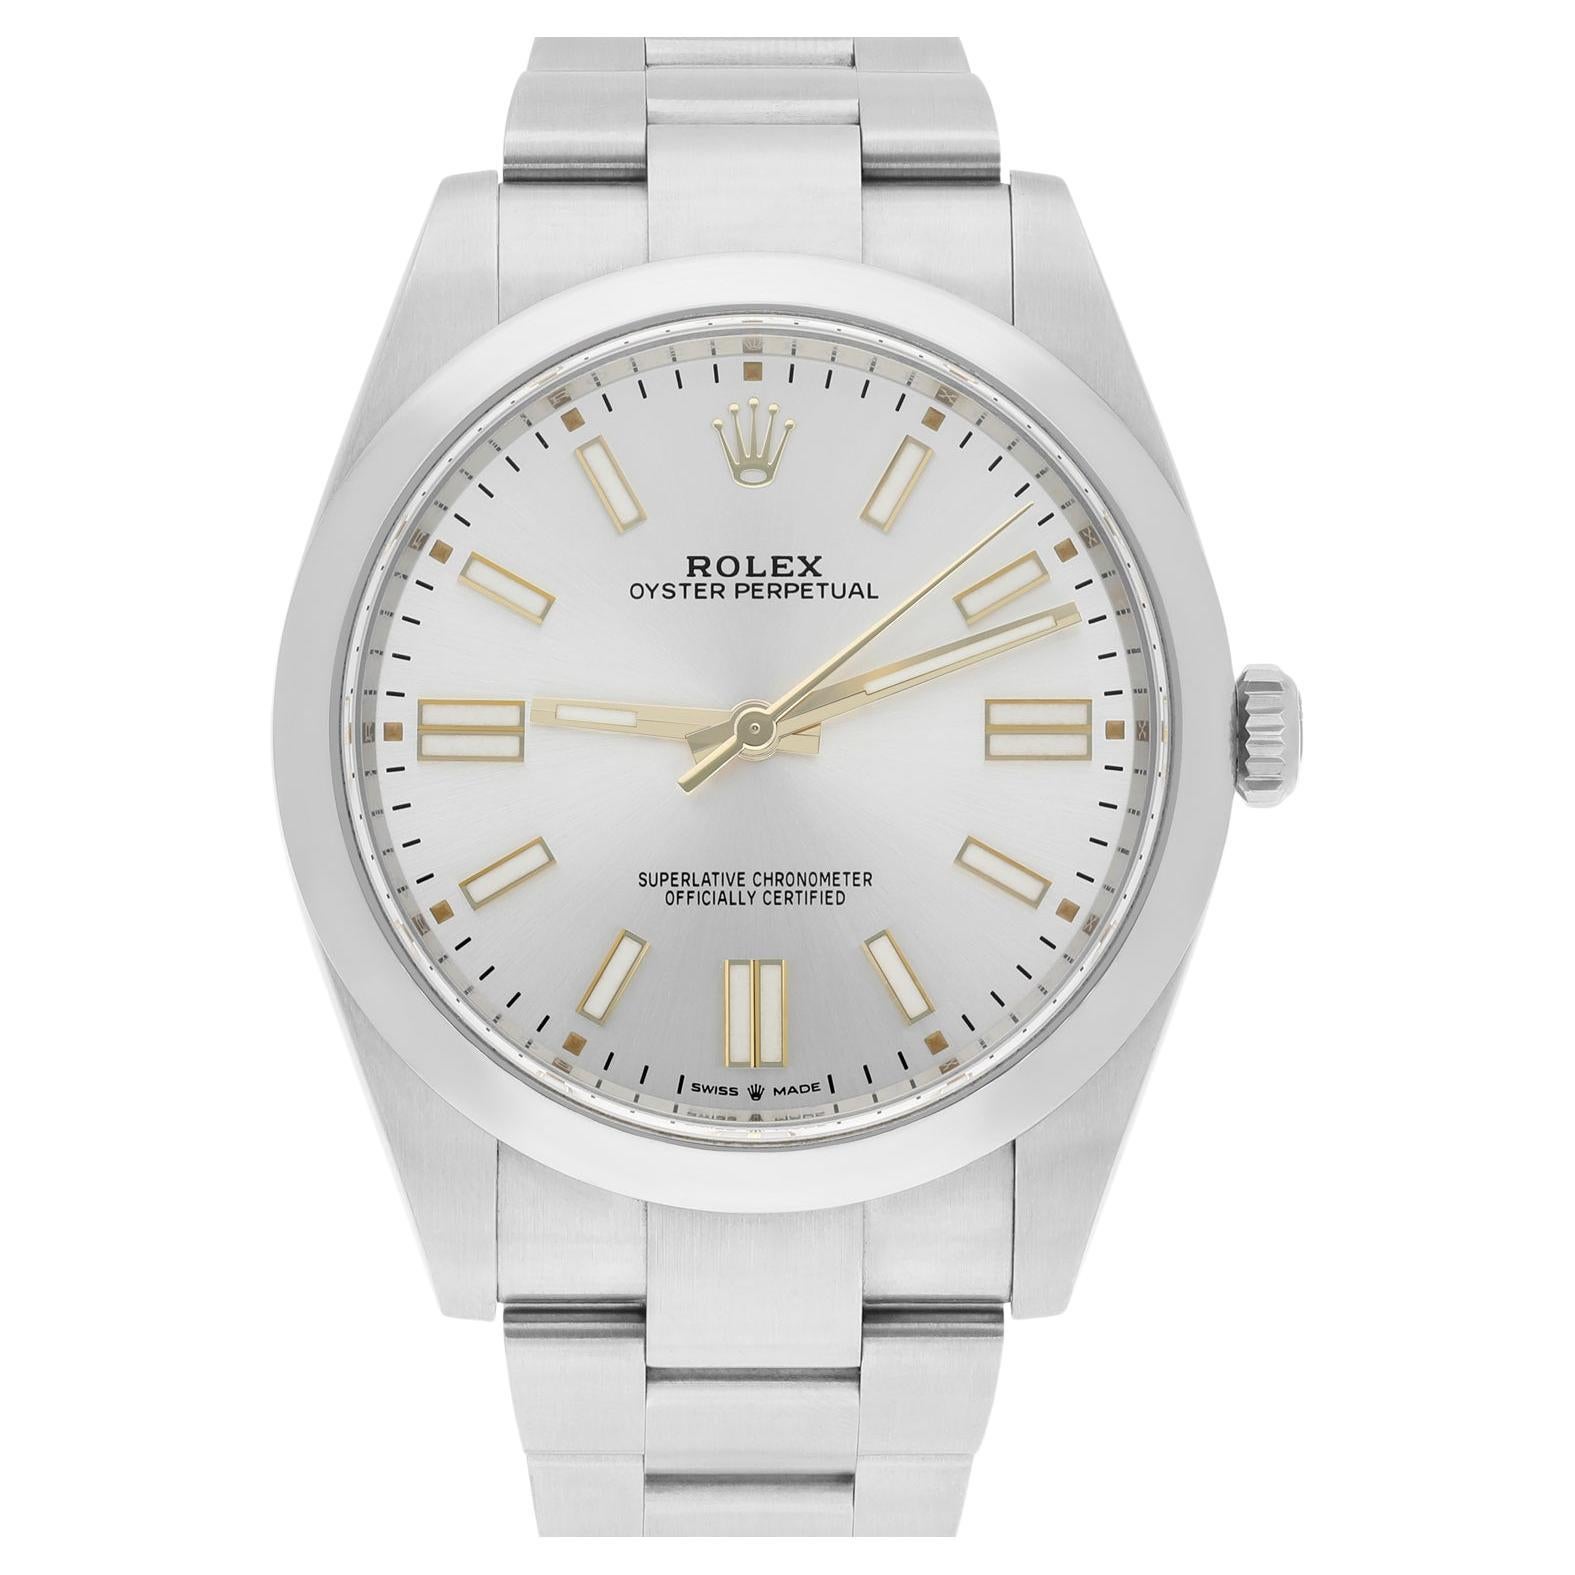 Rolex Oyster Perpetual Uhr